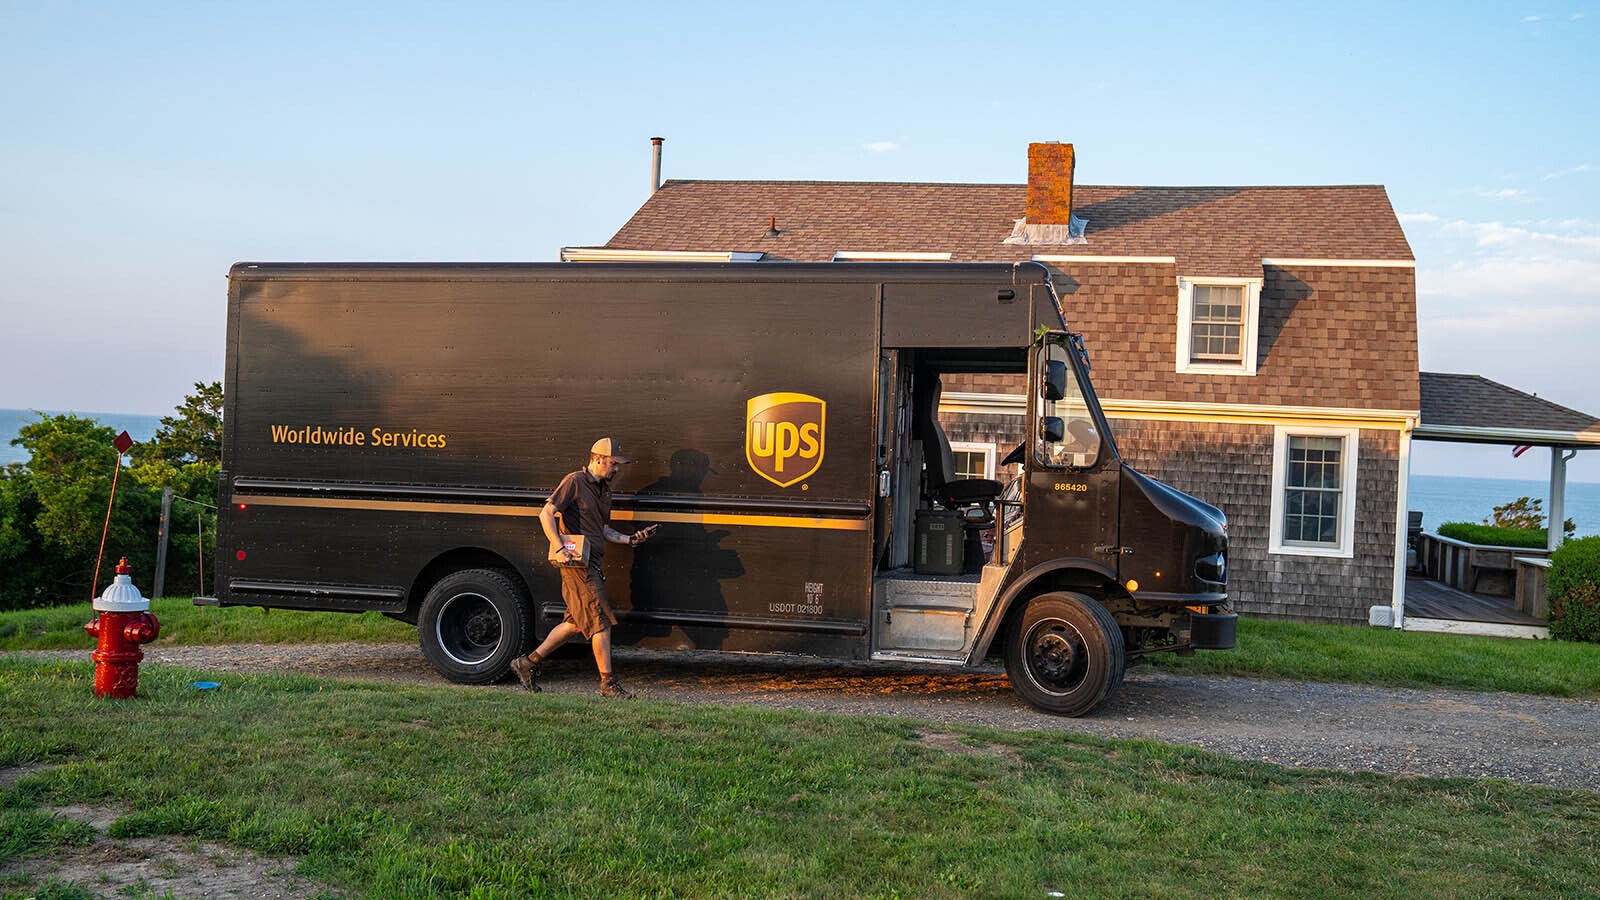 United Parcel Service has customers in rural souteast Wyoming beyond frustrated with an unannounced policy to cut daily deliveries to three days a week.